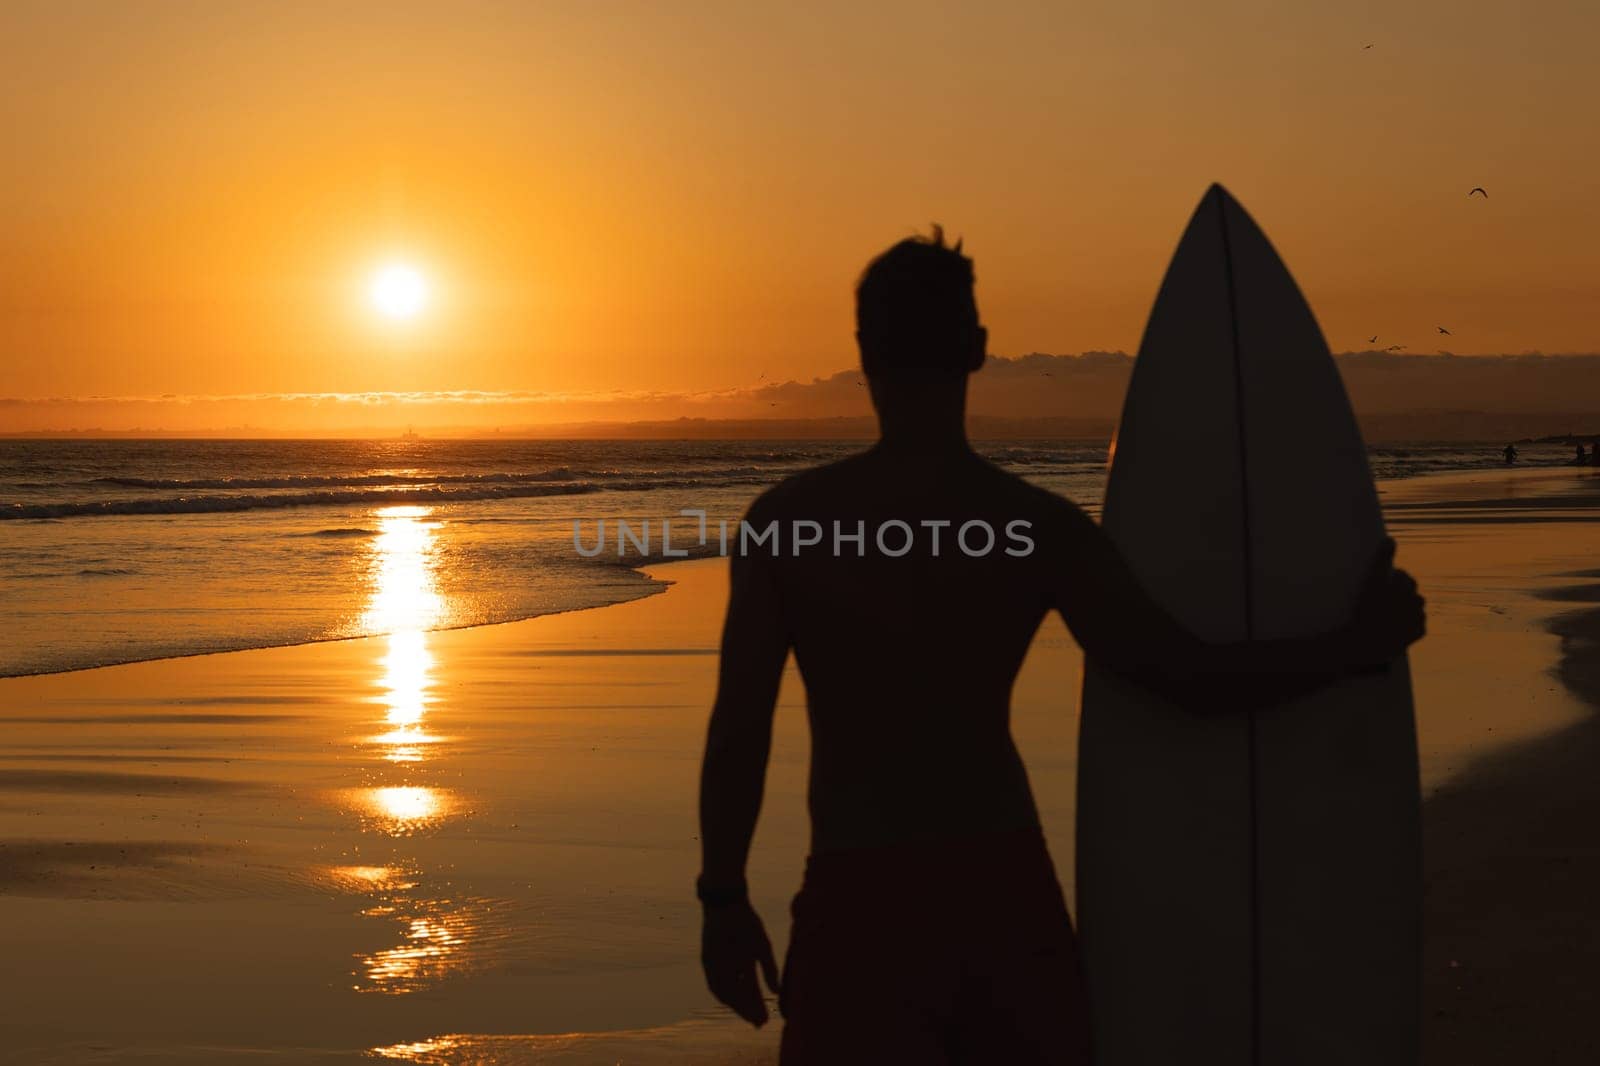 Black silhouette of an athletic man standing on the shore holding a surfboard and looking at sunset. Mid shot